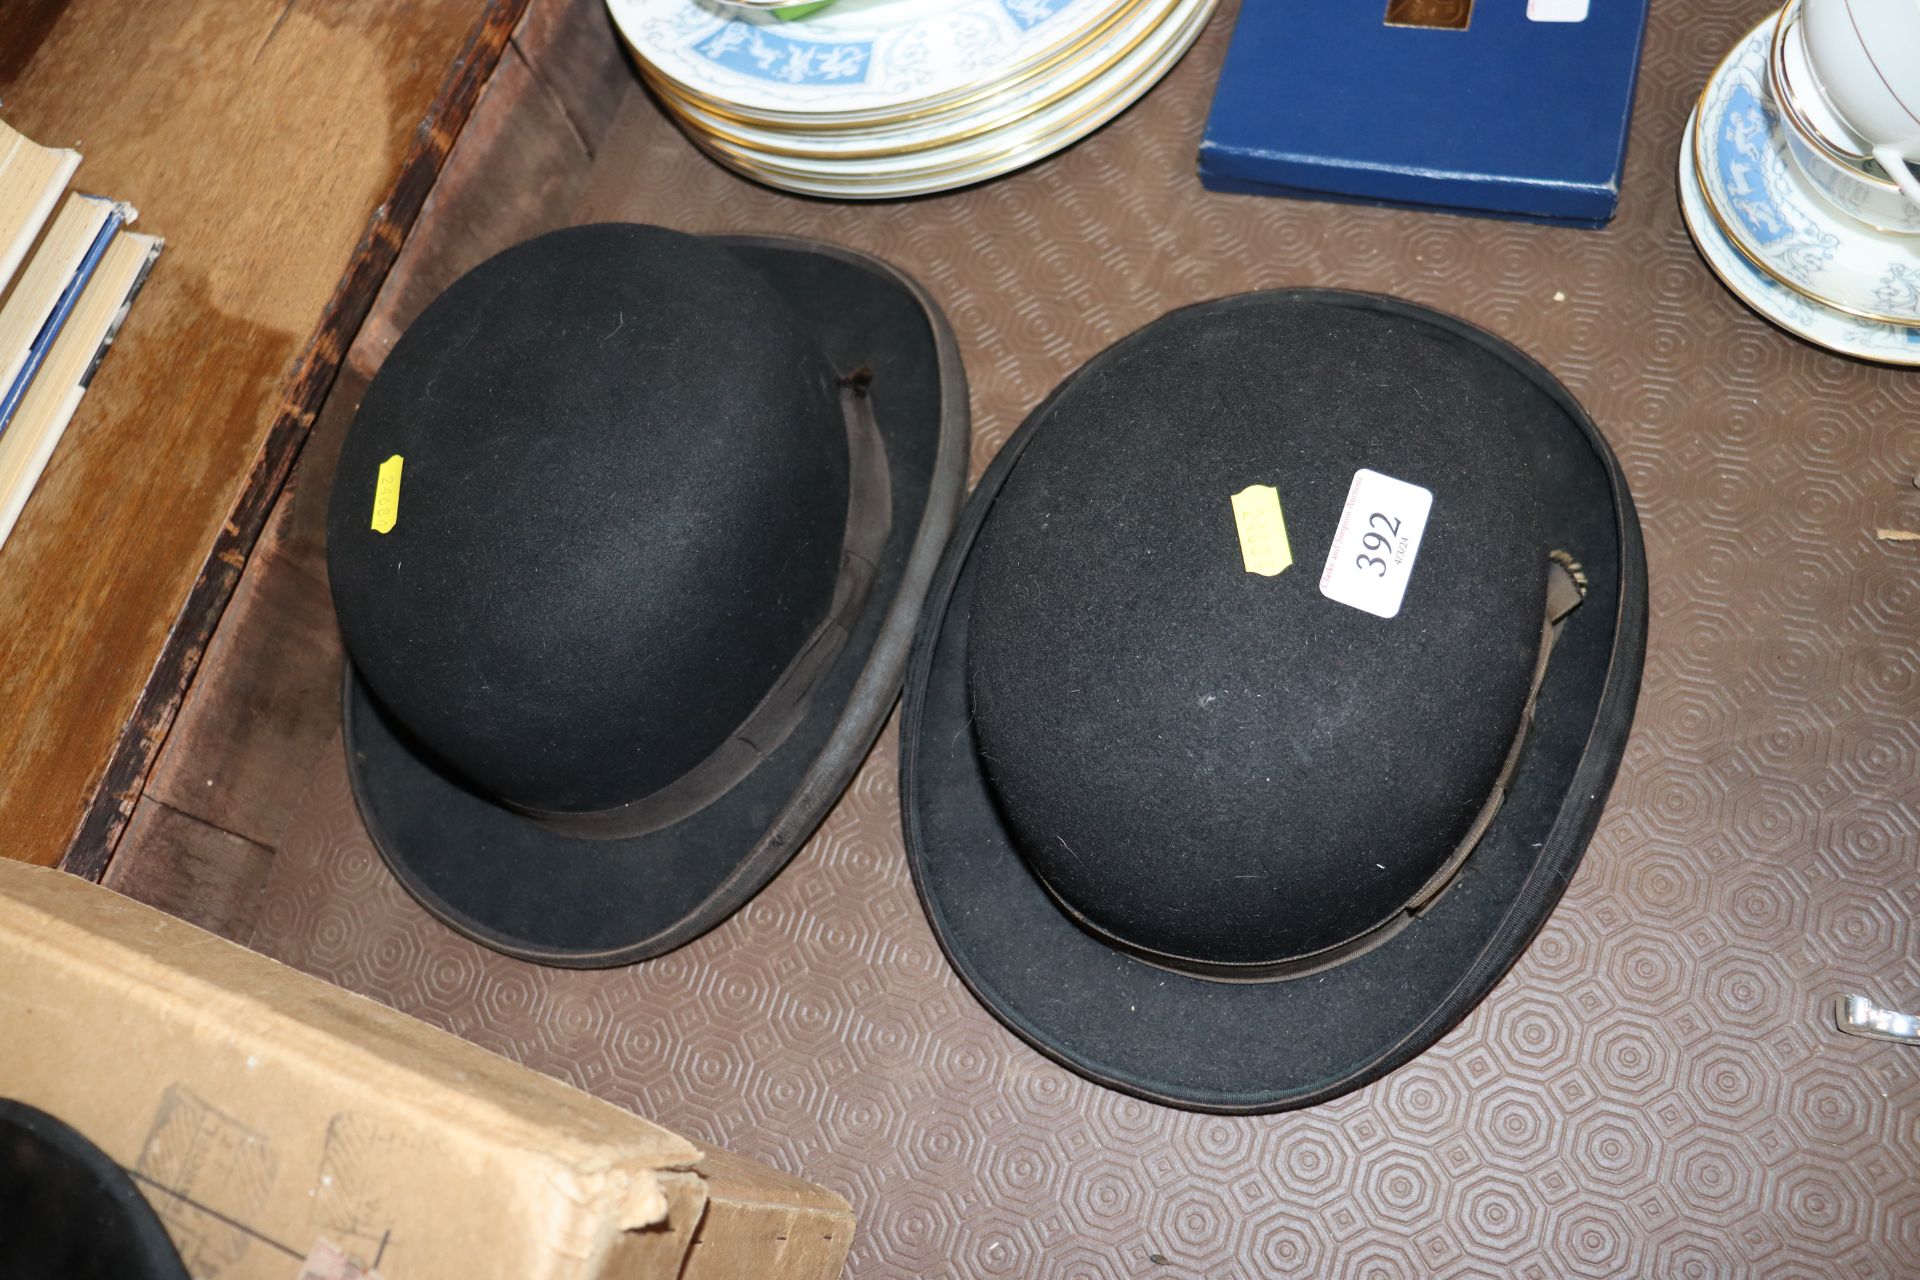 A Scott & Co. bowler hat and a Lincoln Bennett Co.